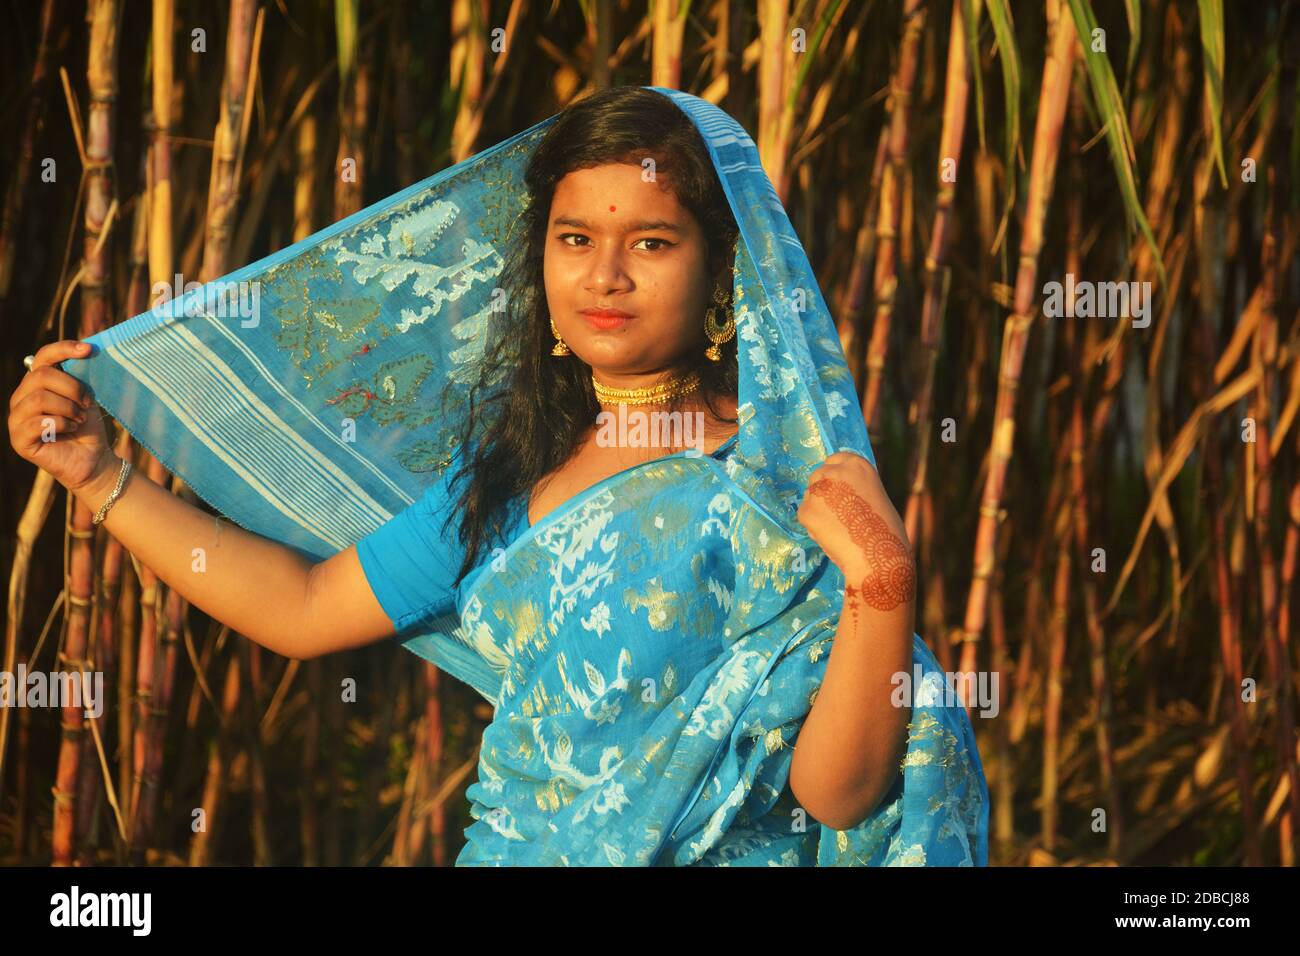 Indian Bengali teenage girl wearing blue saree and blouse and holding sari over head with golden color earrings,necklace standing on a sugarcane field Stock Photo